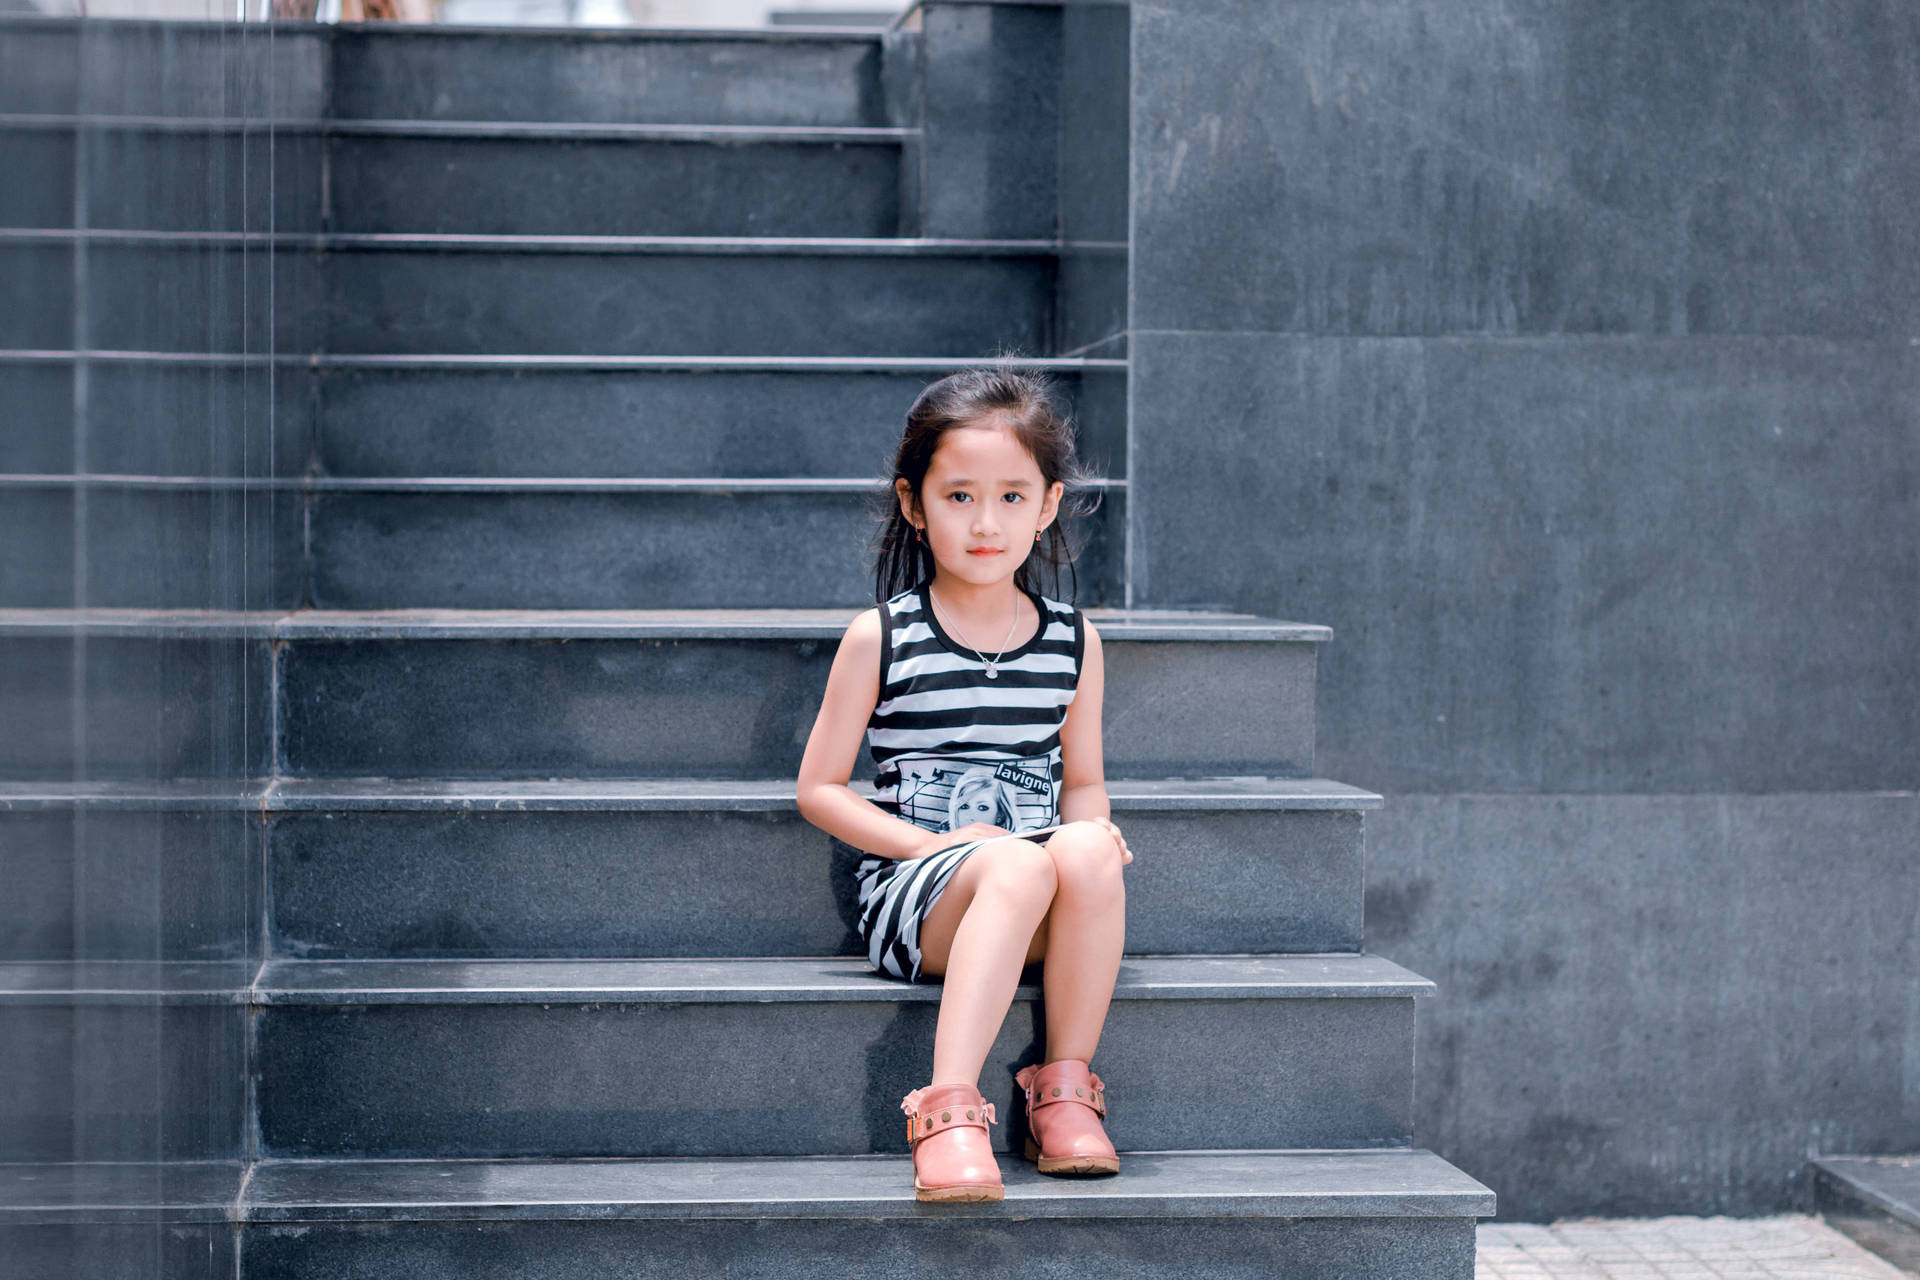 Innocent Glance - Adorable Girl On Grey Stairway Background